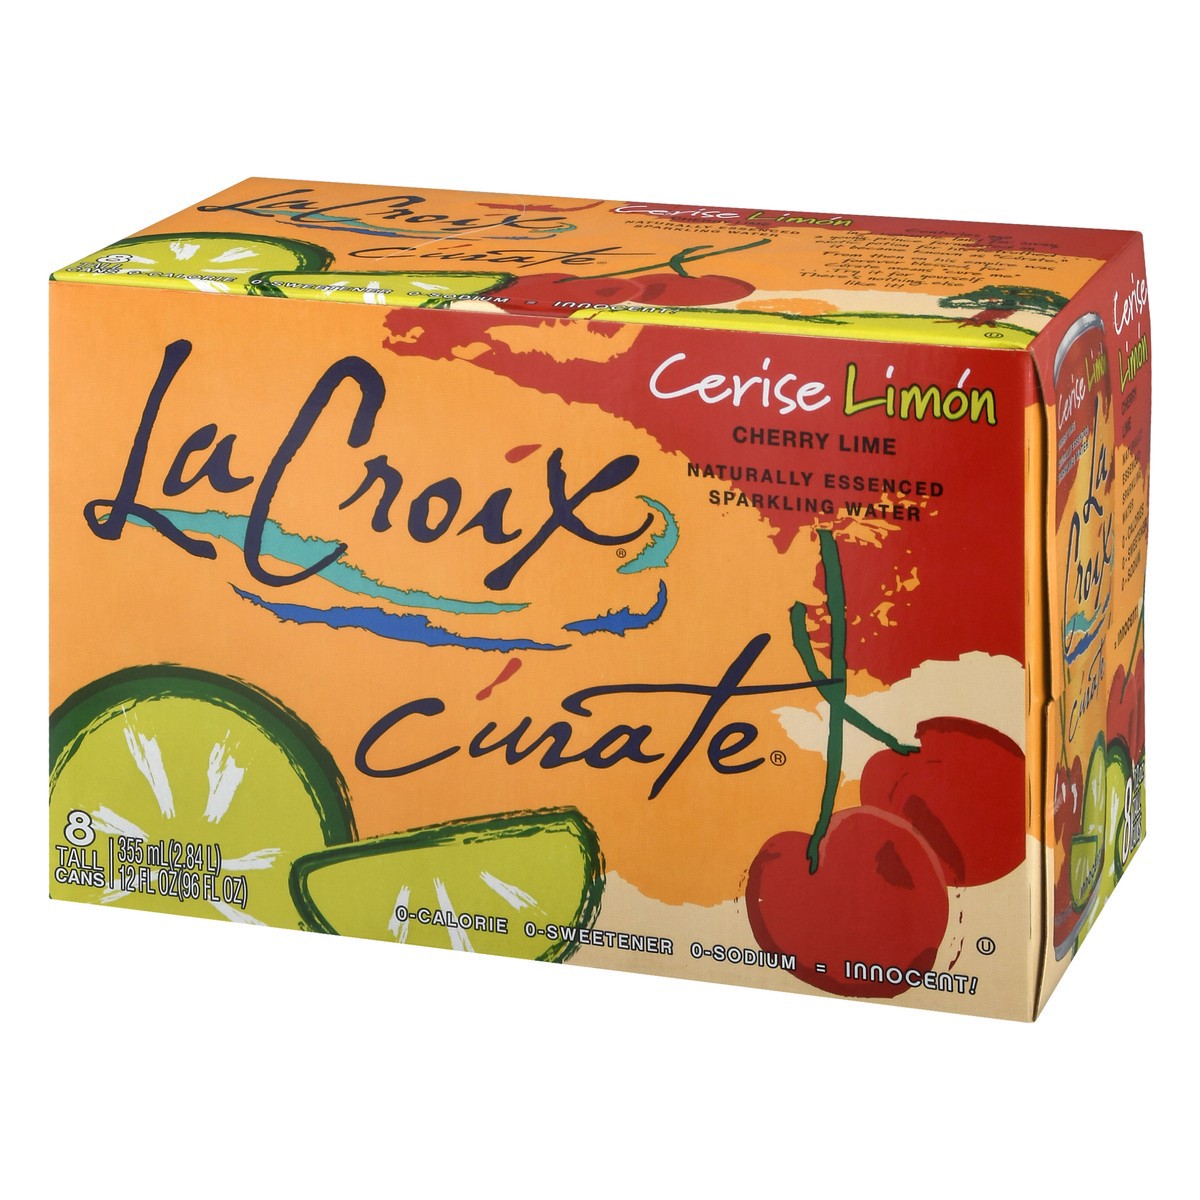 slide 8 of 17, La Croix Curate Cherry Lime Sparkling Water, 8 ct